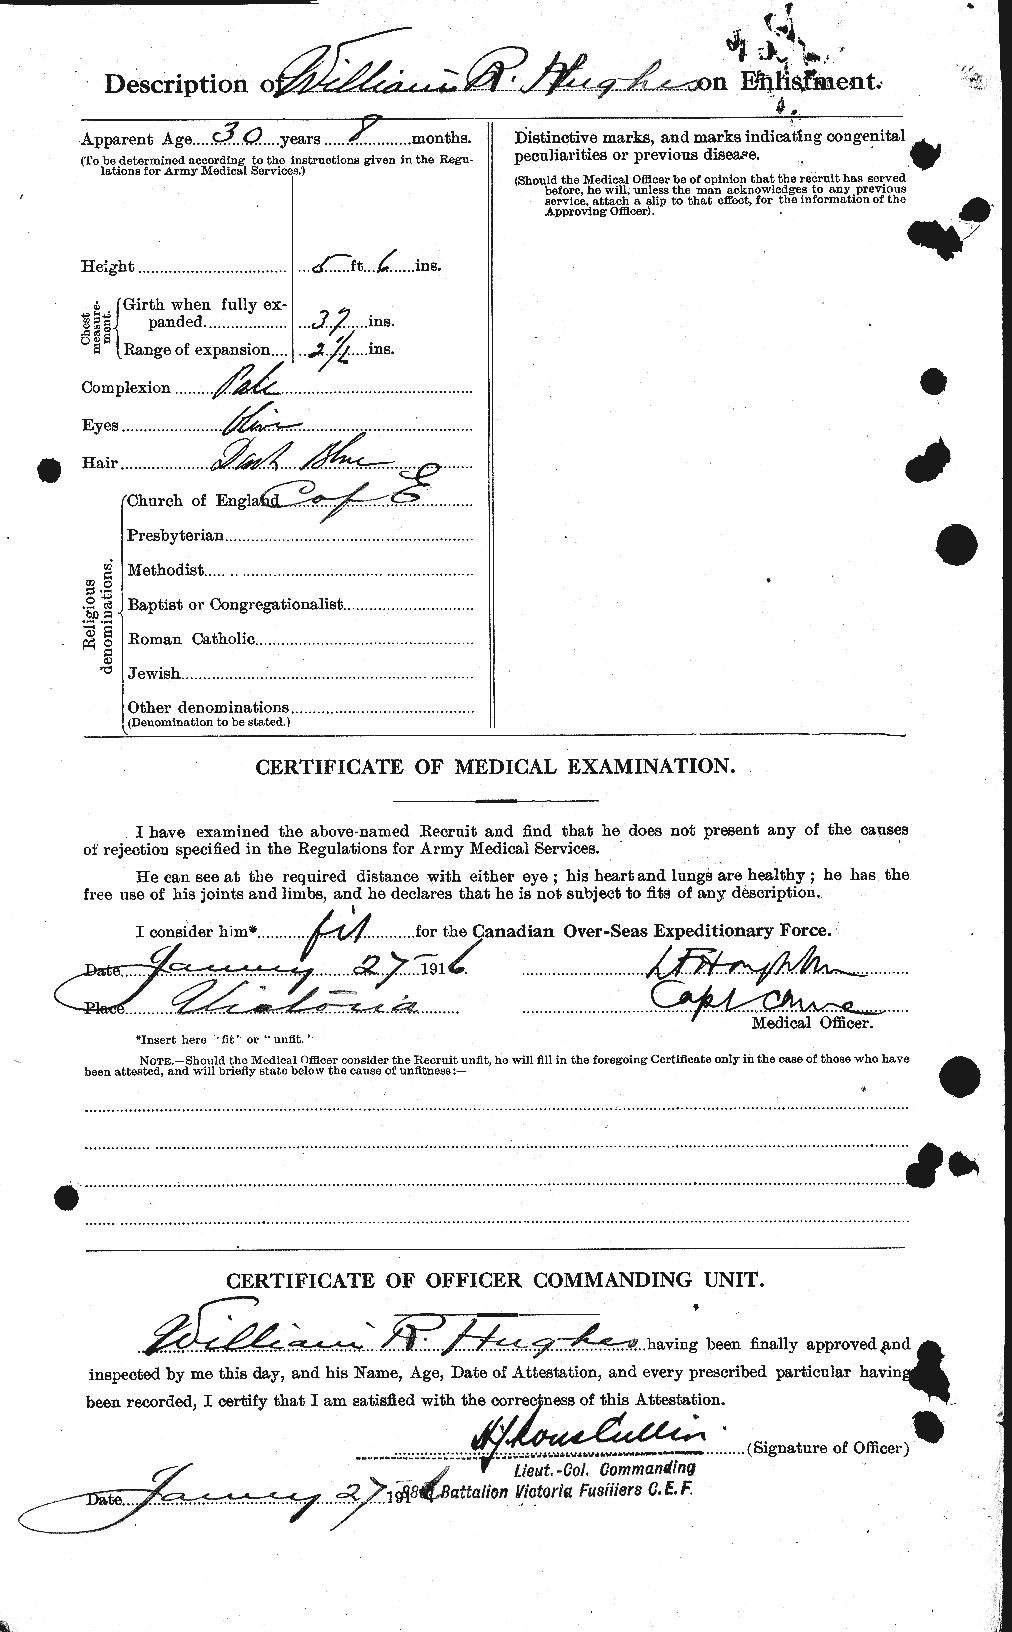 Personnel Records of the First World War - CEF 405955b